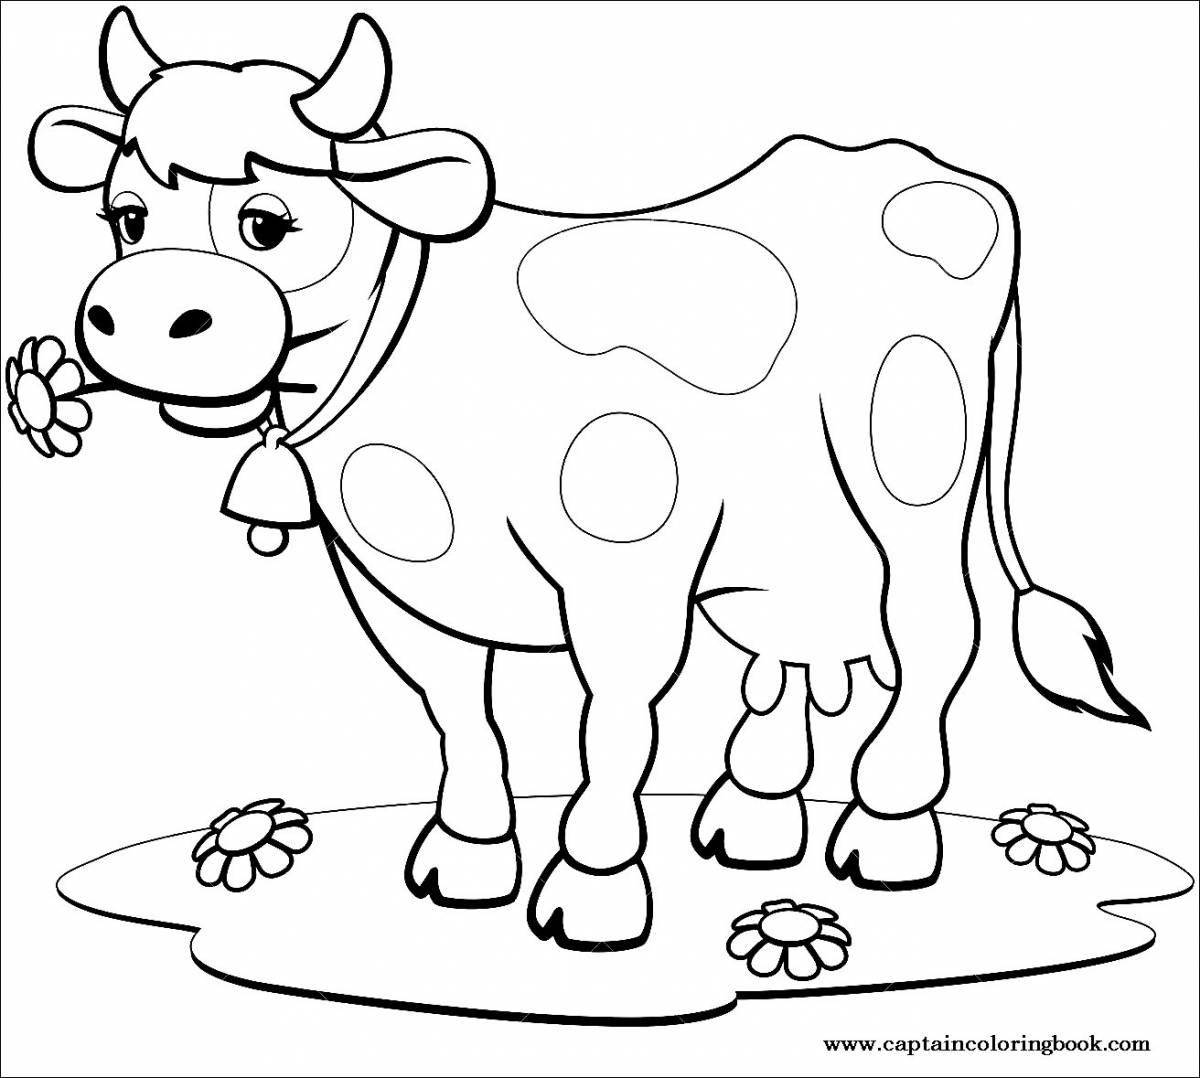 Cow coloring page for kids